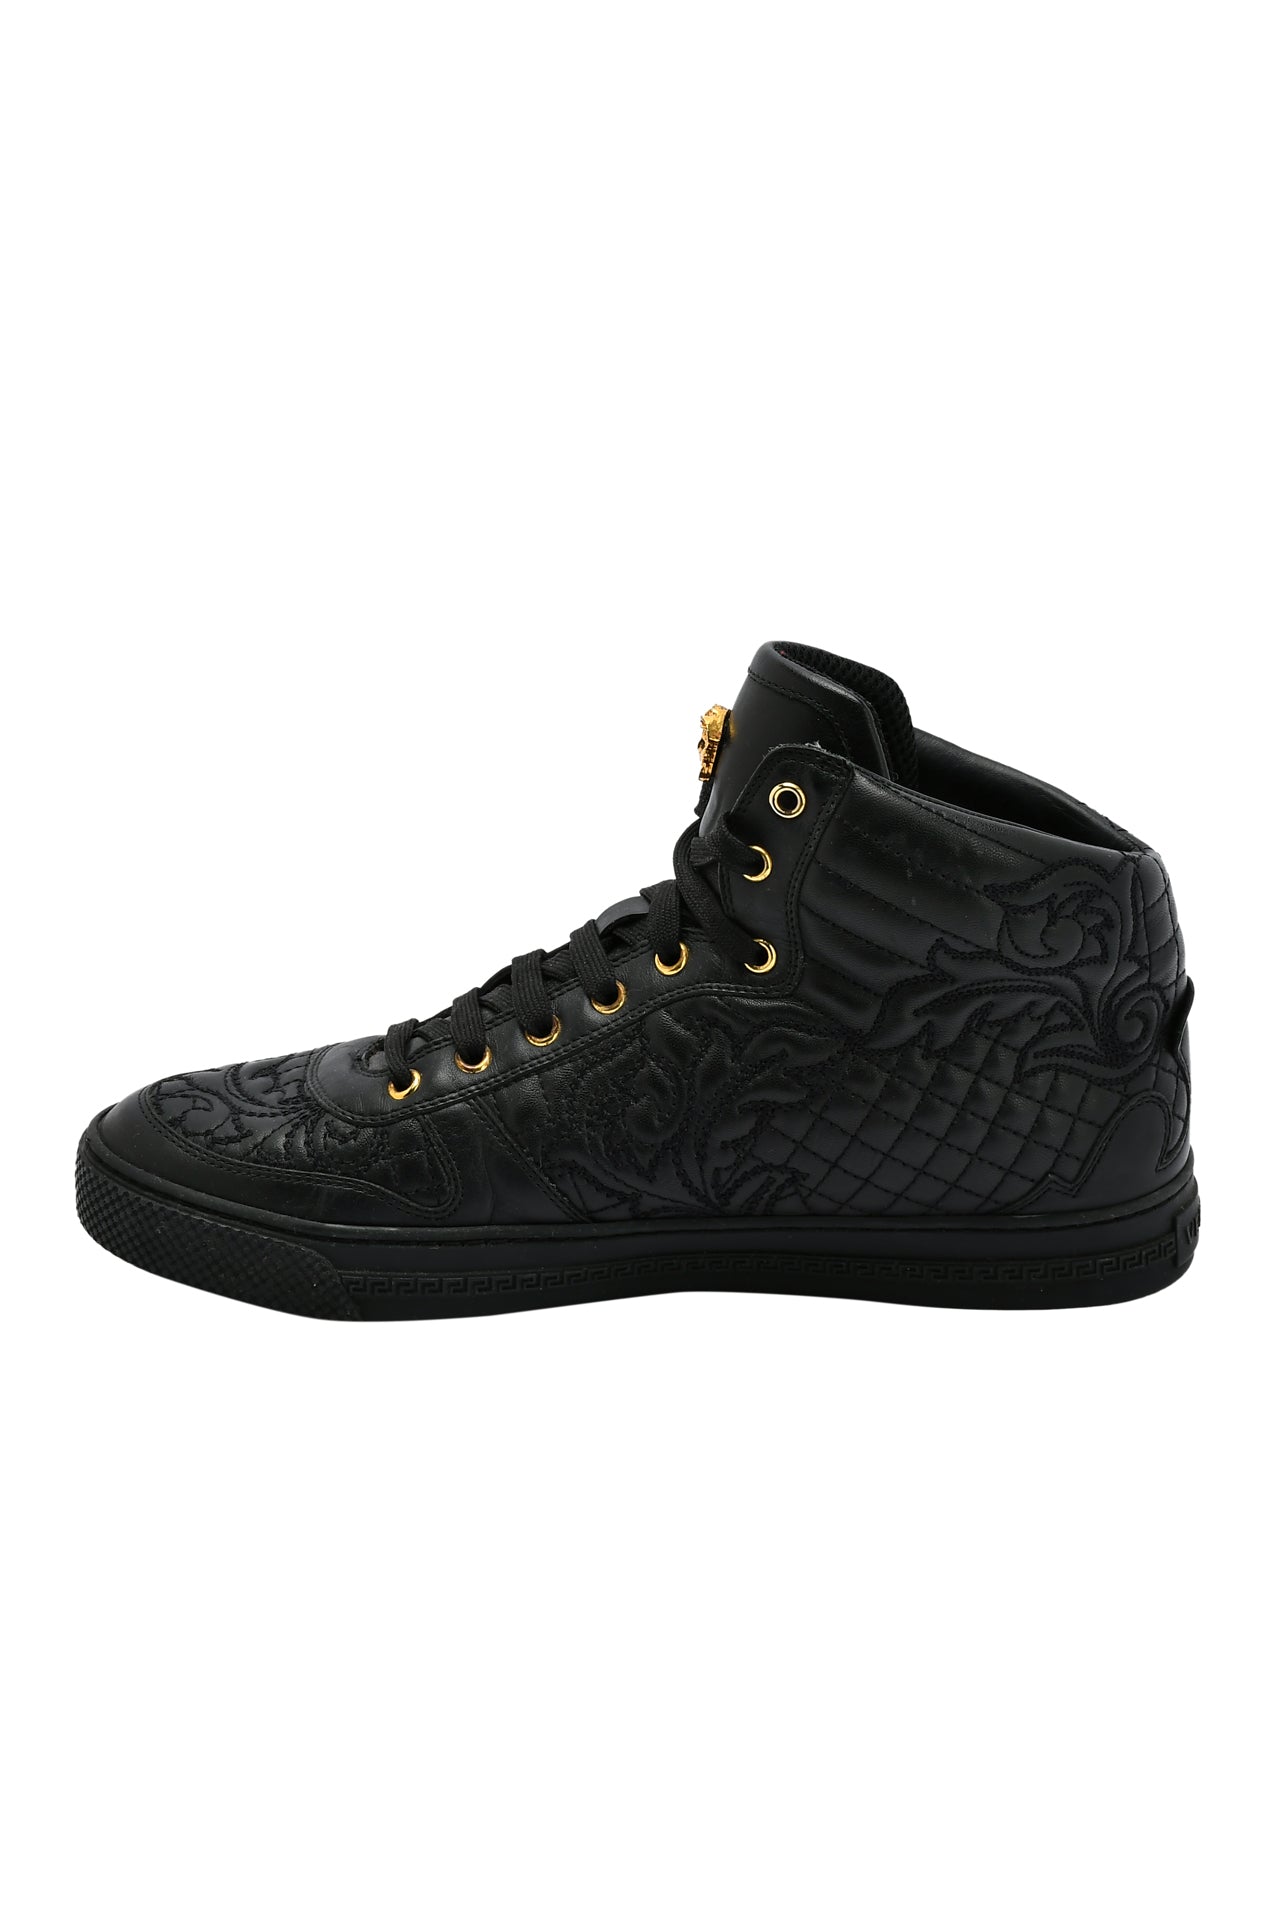 Versace Black Embroidered Leather Medusa High Top Sneakers EU 42